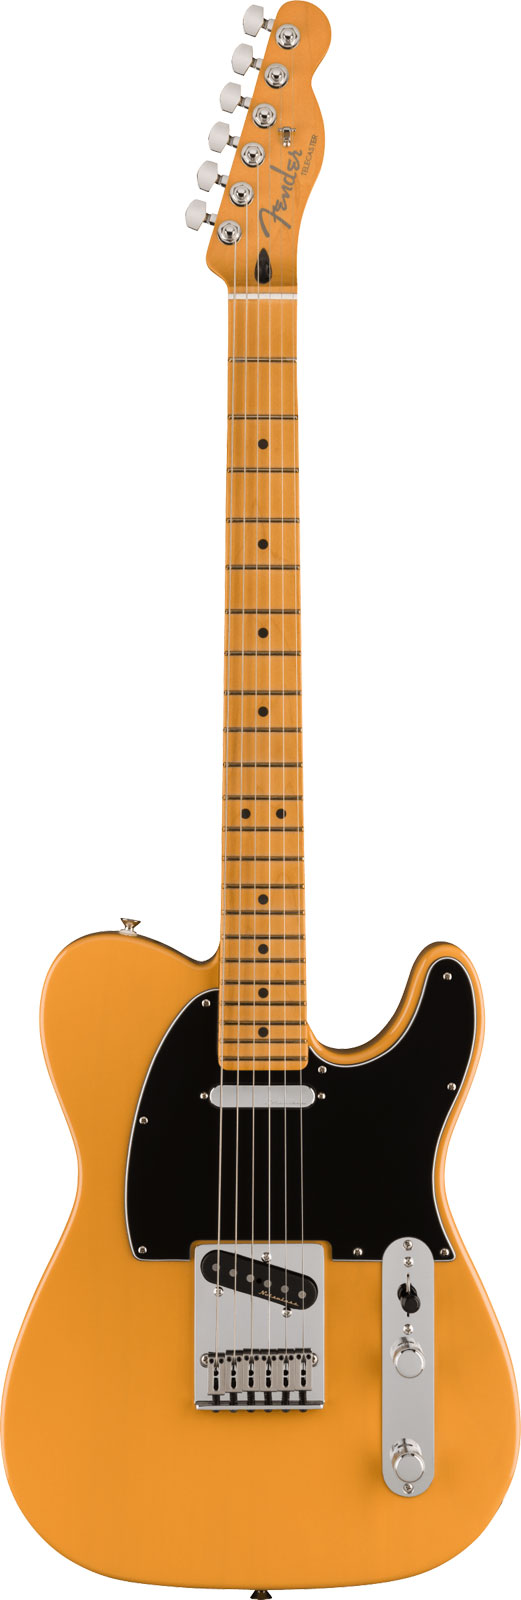 FENDER MEXICAN PLAYER PLUS TELECASTER MN BUTTERSCOTCH BLONDE